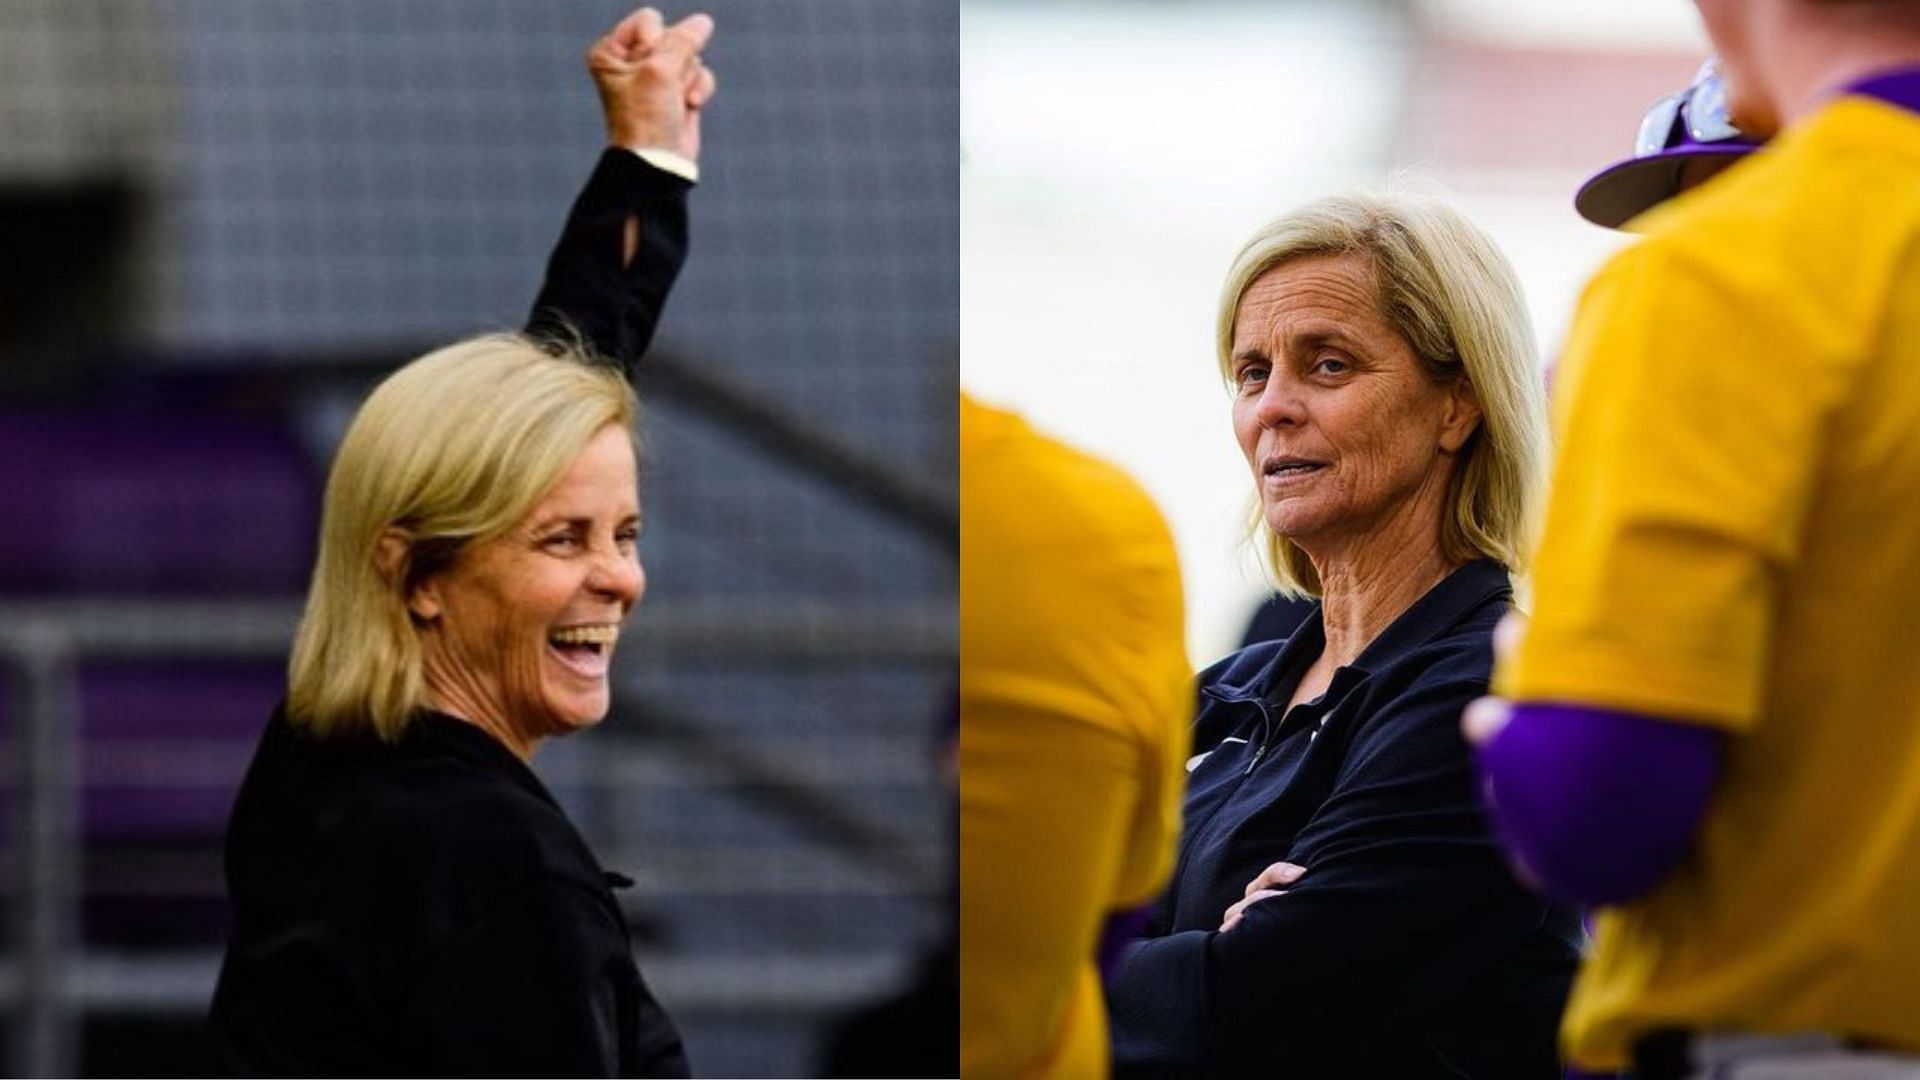 WINNER: Collecting championships is what LSU's new homegrown women's  basketball coach Kim Mulkey has done her entire life